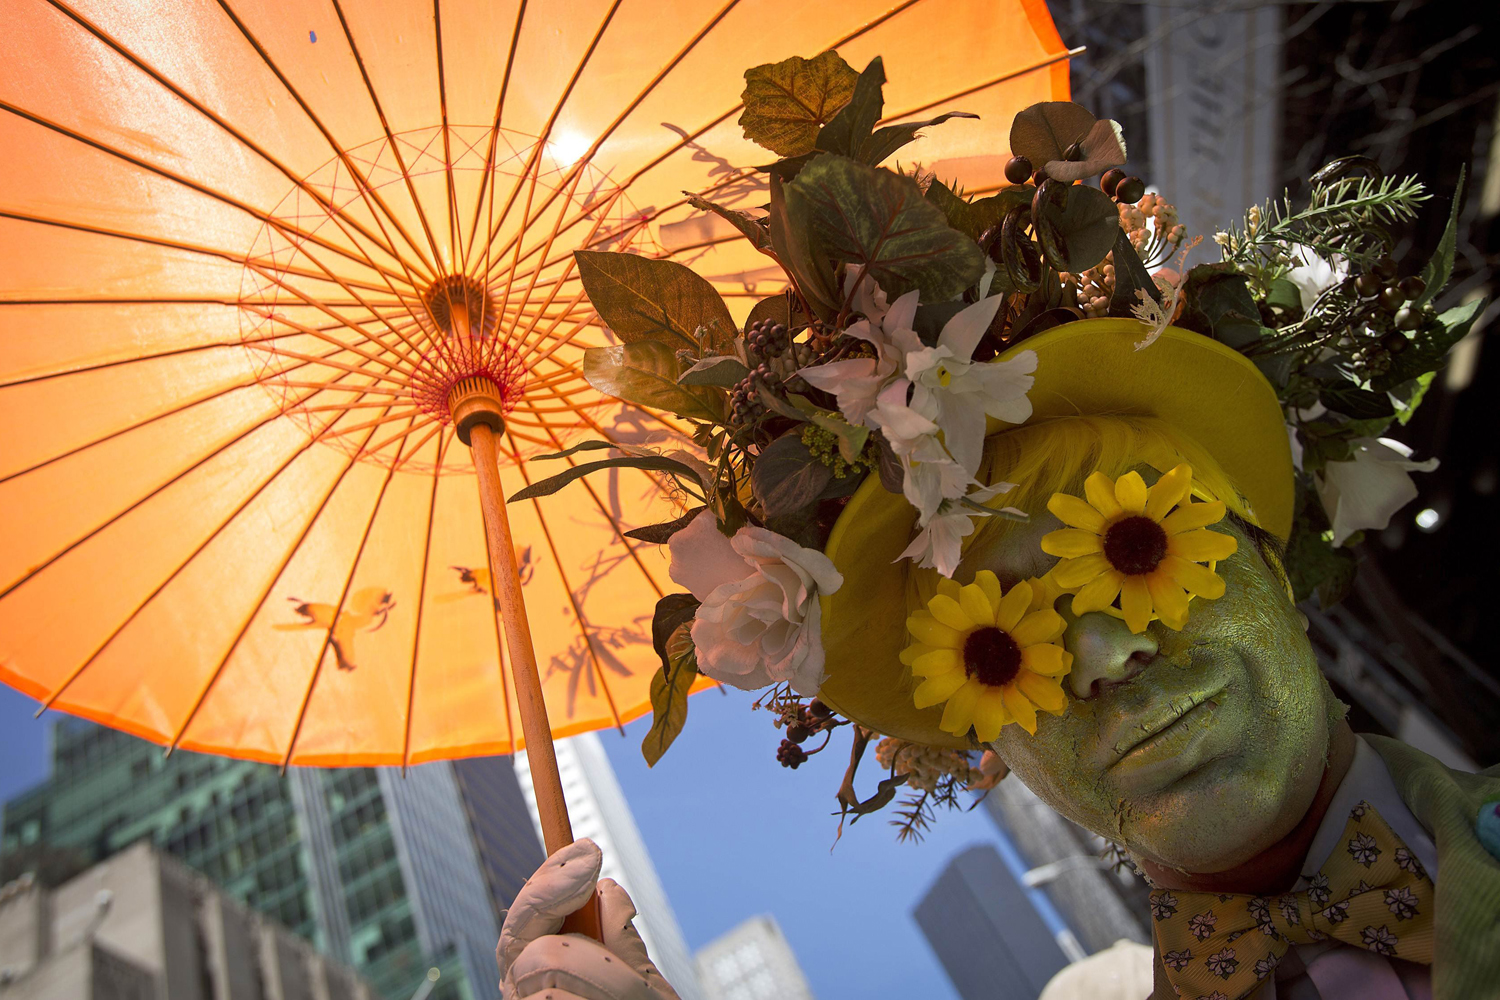 A participant dressed in costume holds an umbrella at the annual Easter Bonnet Parade in New York